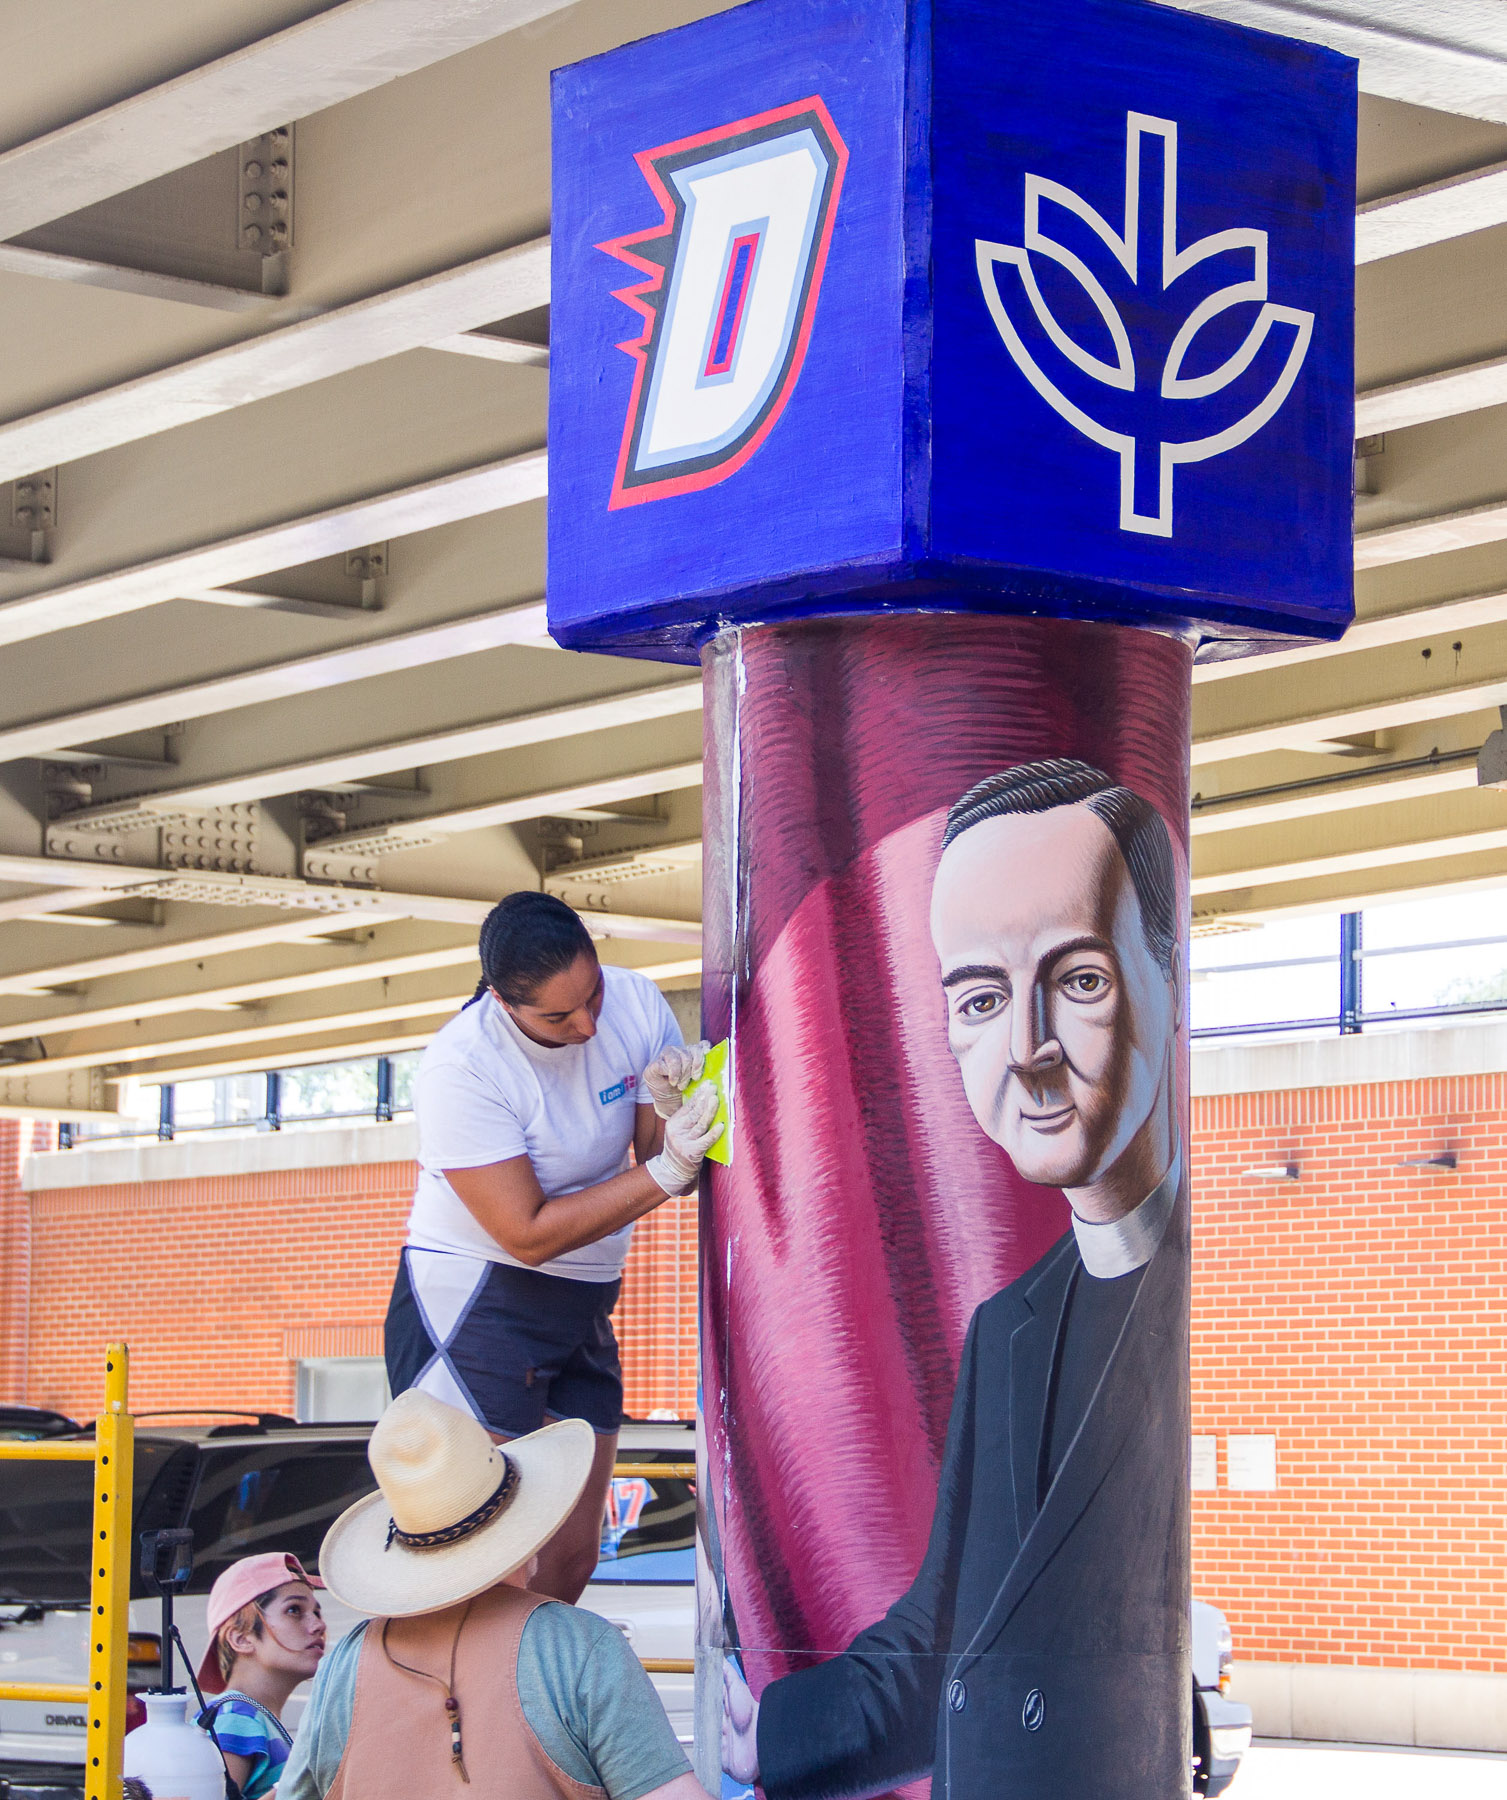 Students help install the new murals on the CTA 'L' pillars as part of the "The Story of the Little School Under the 'L'" art project led by Brother Mark Elder, C.M. (DePaul University/Russell Dorn)